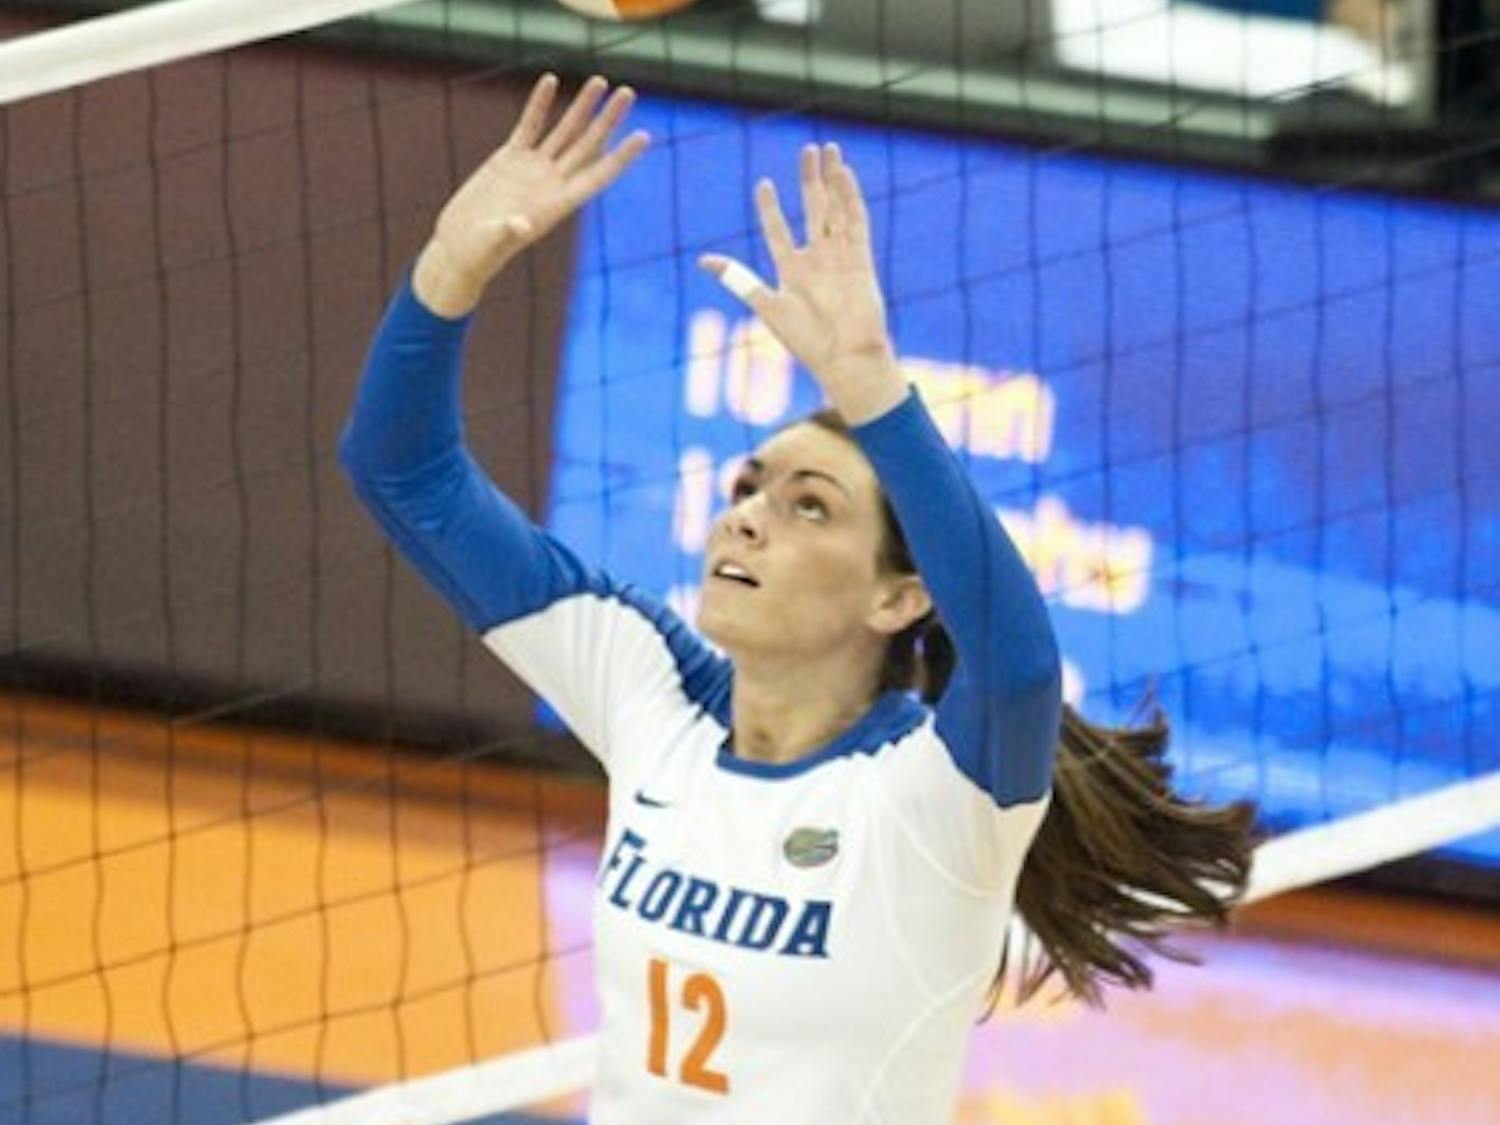 Florida setter/right-side hitter Kelly Murphy had 25 kills and hit .367 in UF’s first- and second-round wins.